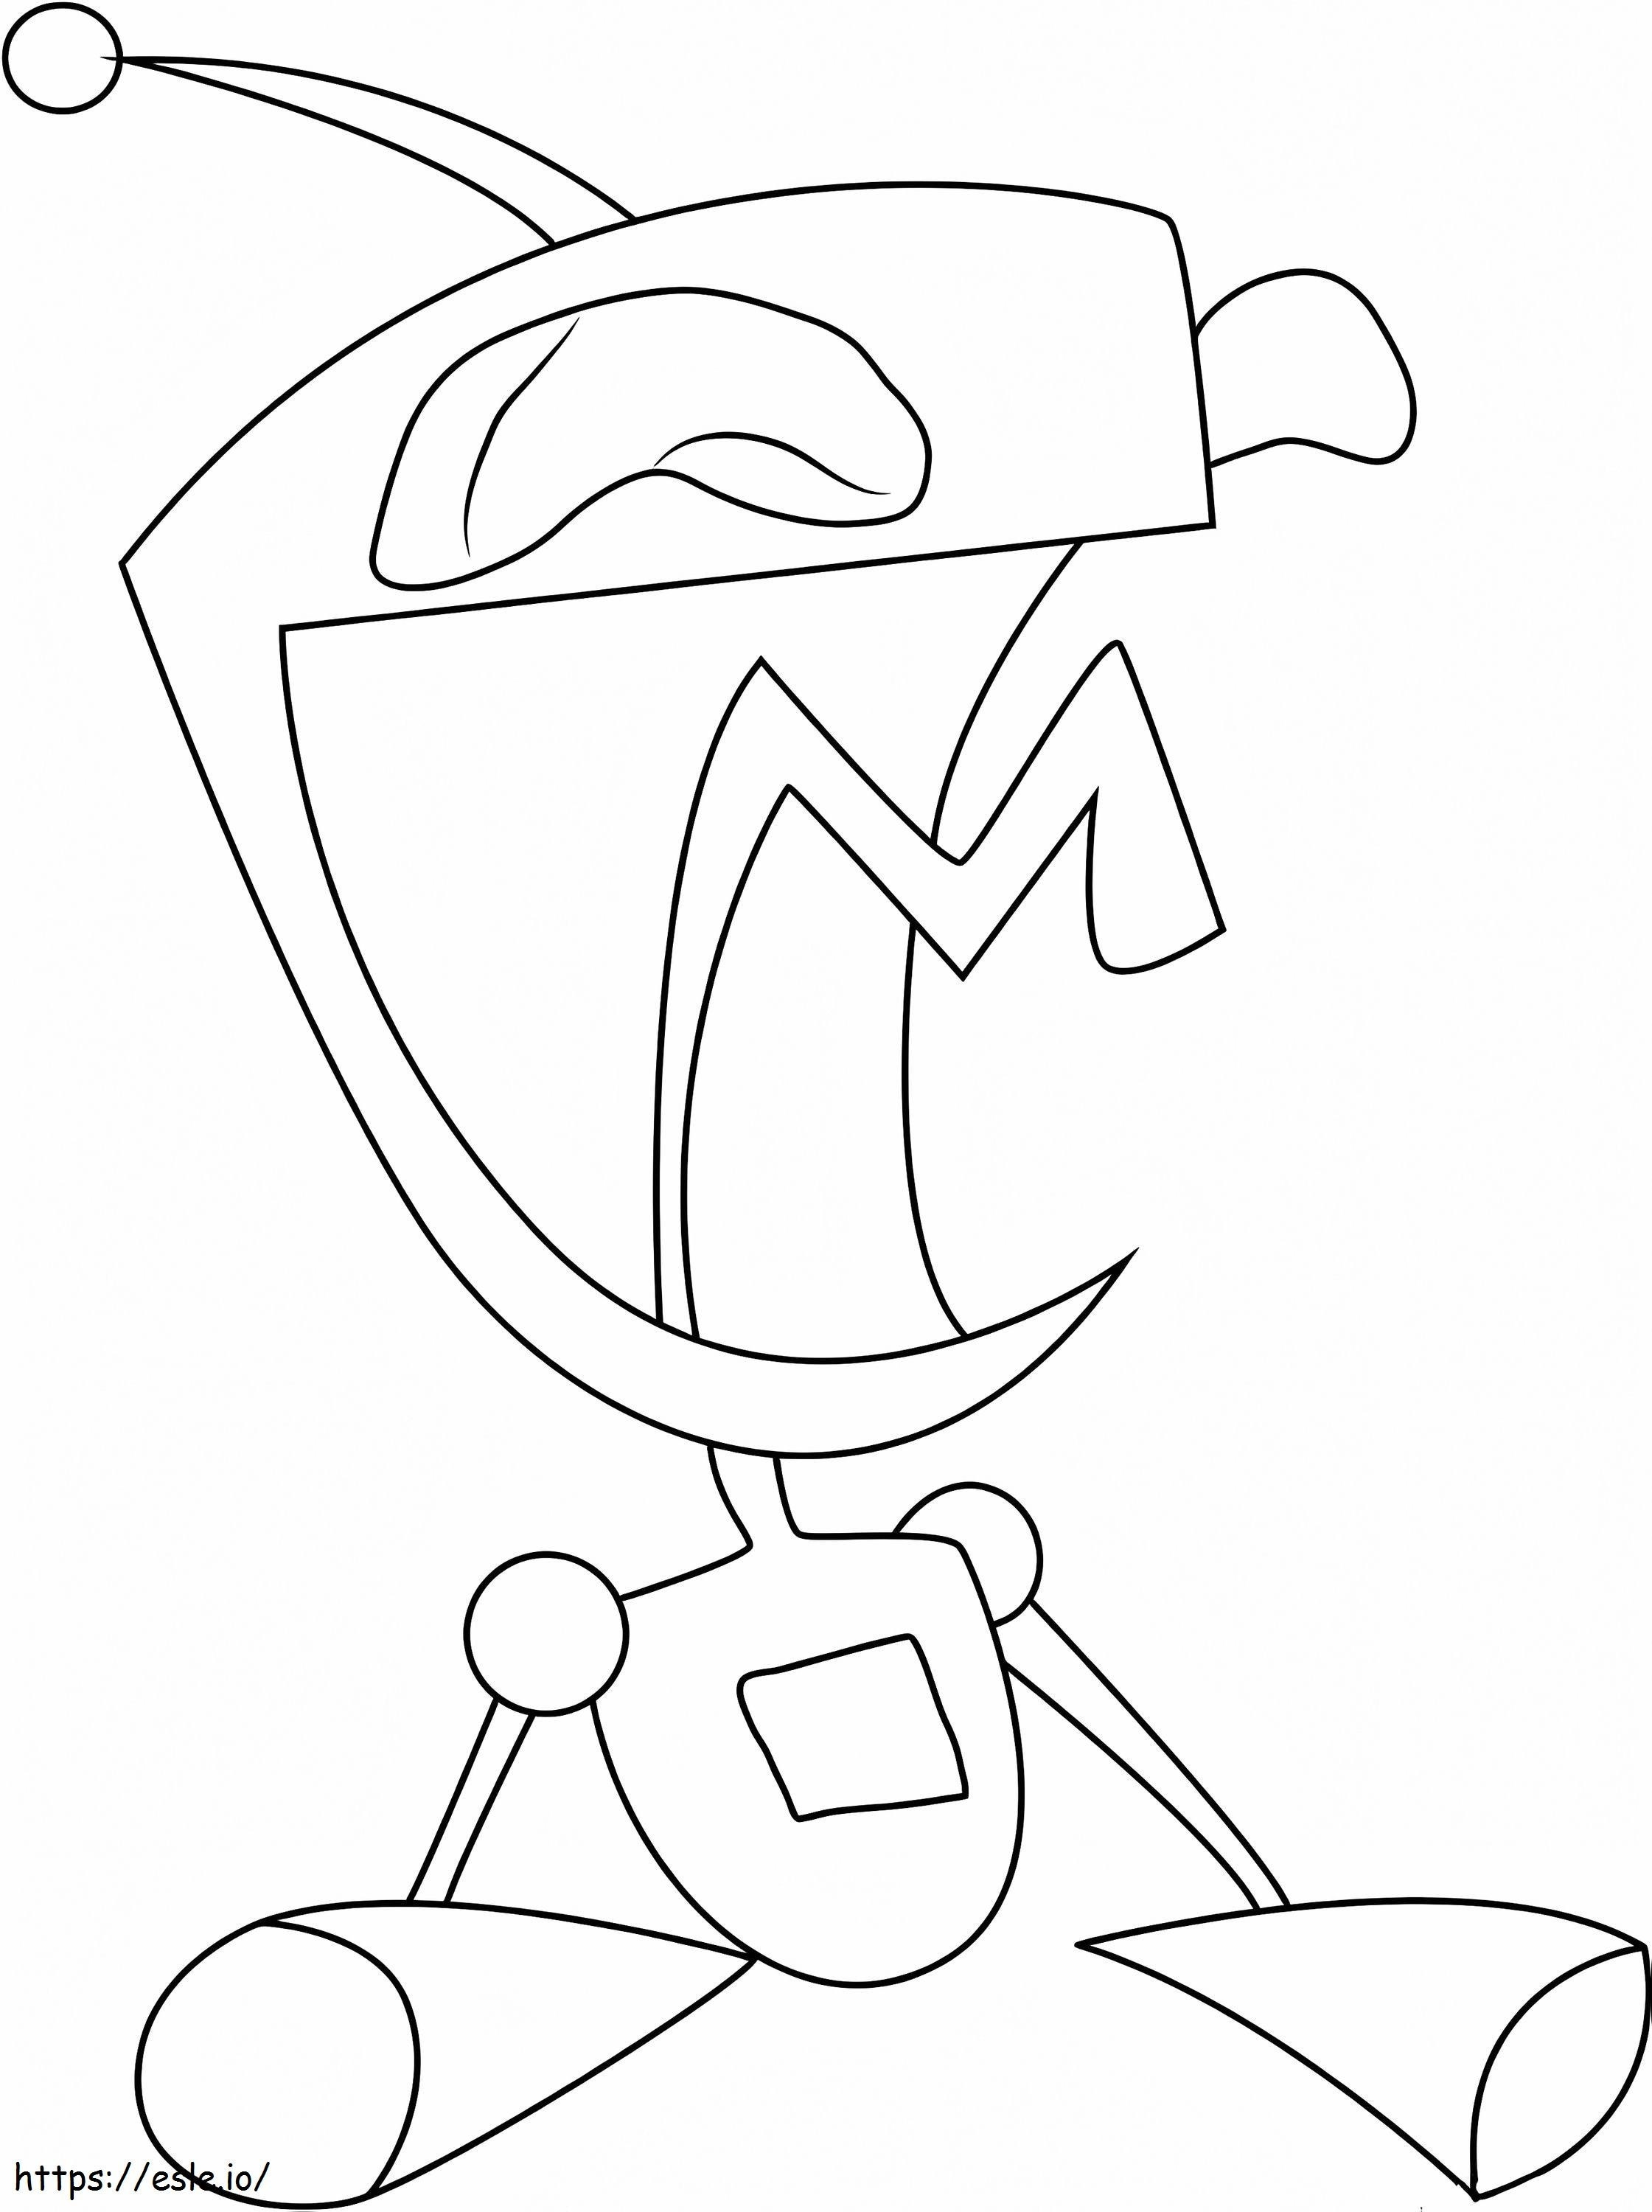 Gir Laughing coloring page